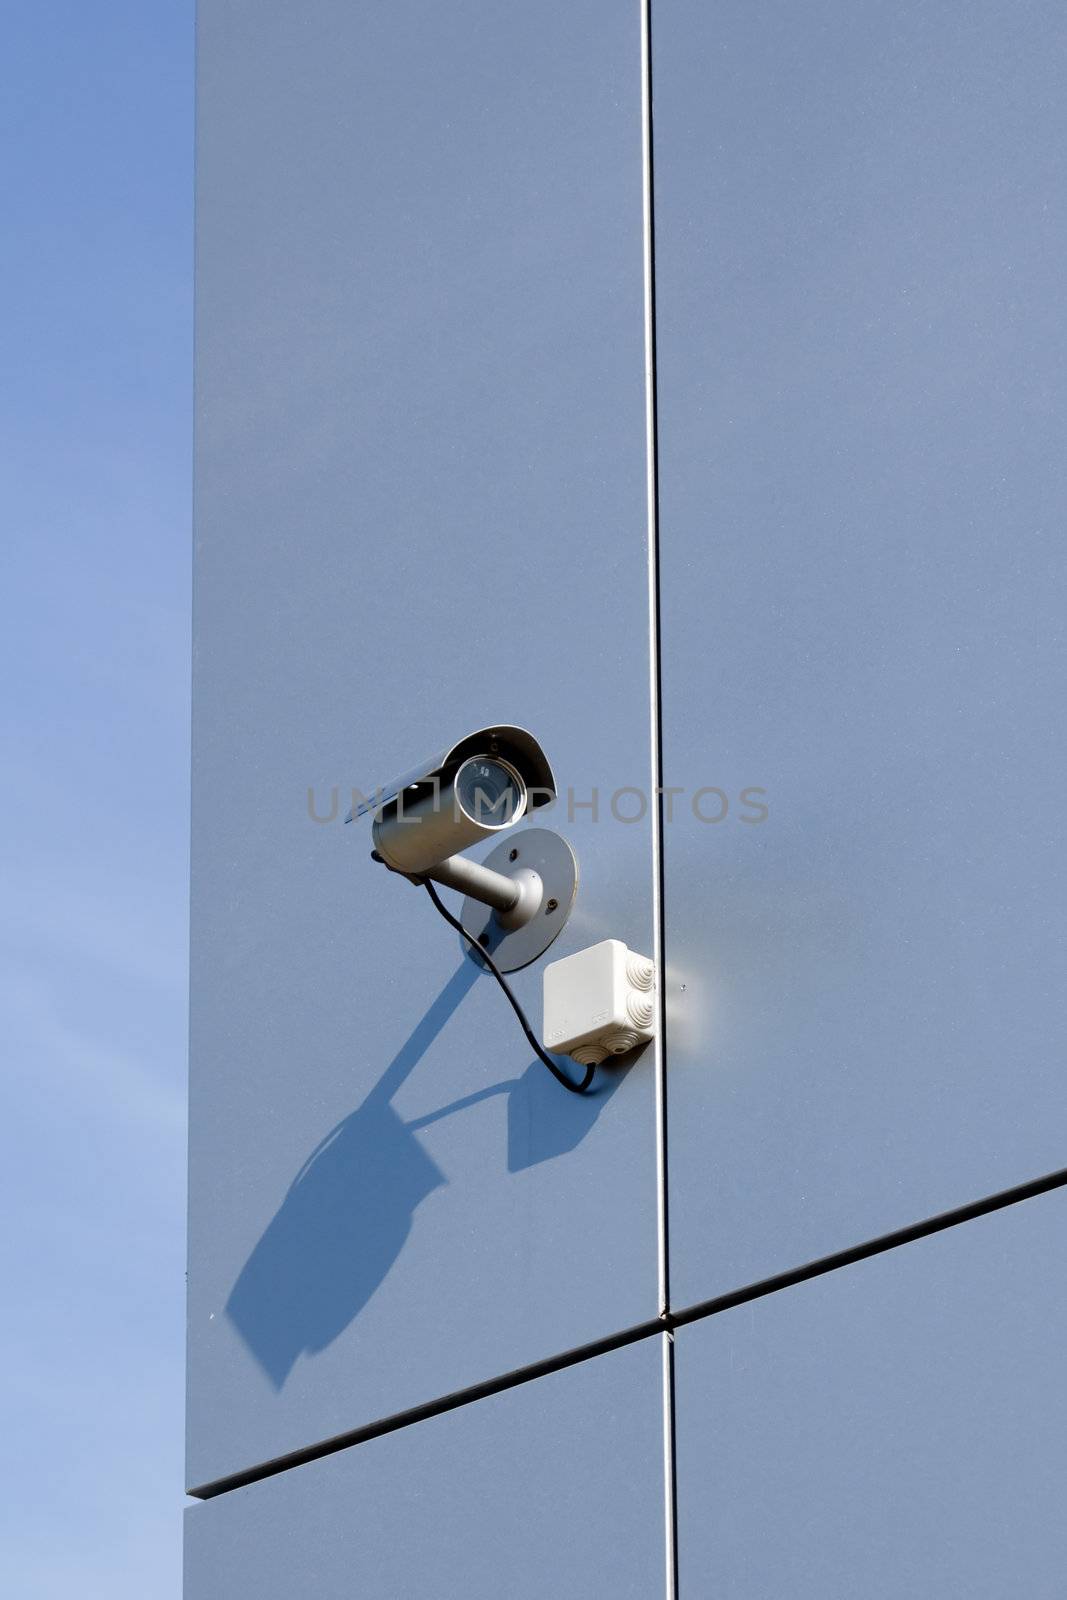 A security camera on the side of an office building.